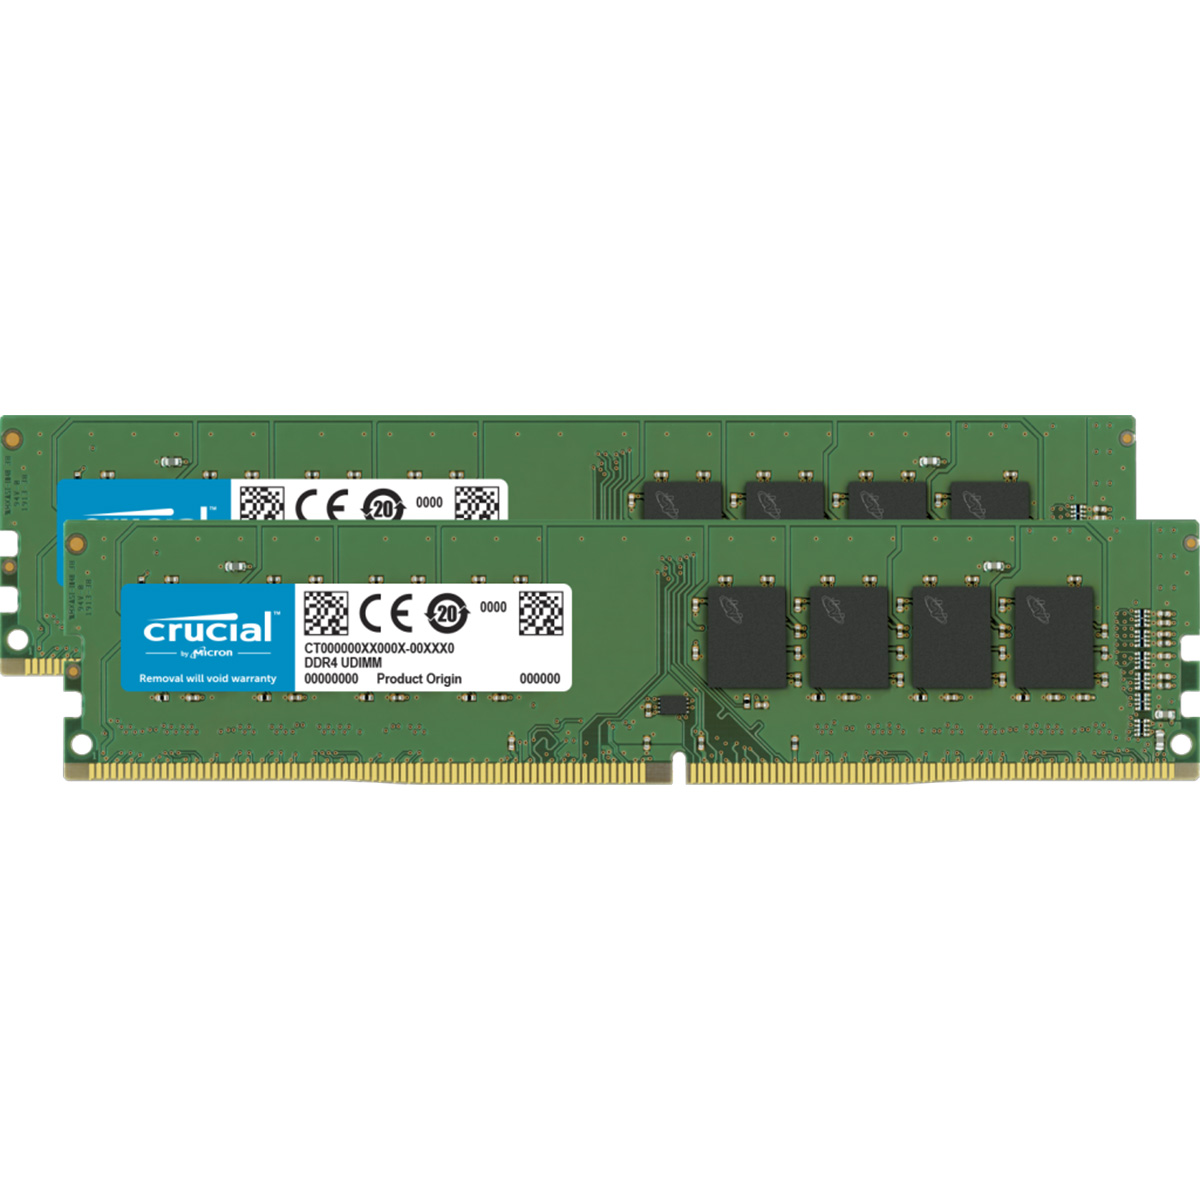 PCメモリー  32GB Kit(16GBx2) DDR4-3200MHz (PC4-25600) CL22 288pin UDIMM NON-ECC 1.2V Universal Part Numbers